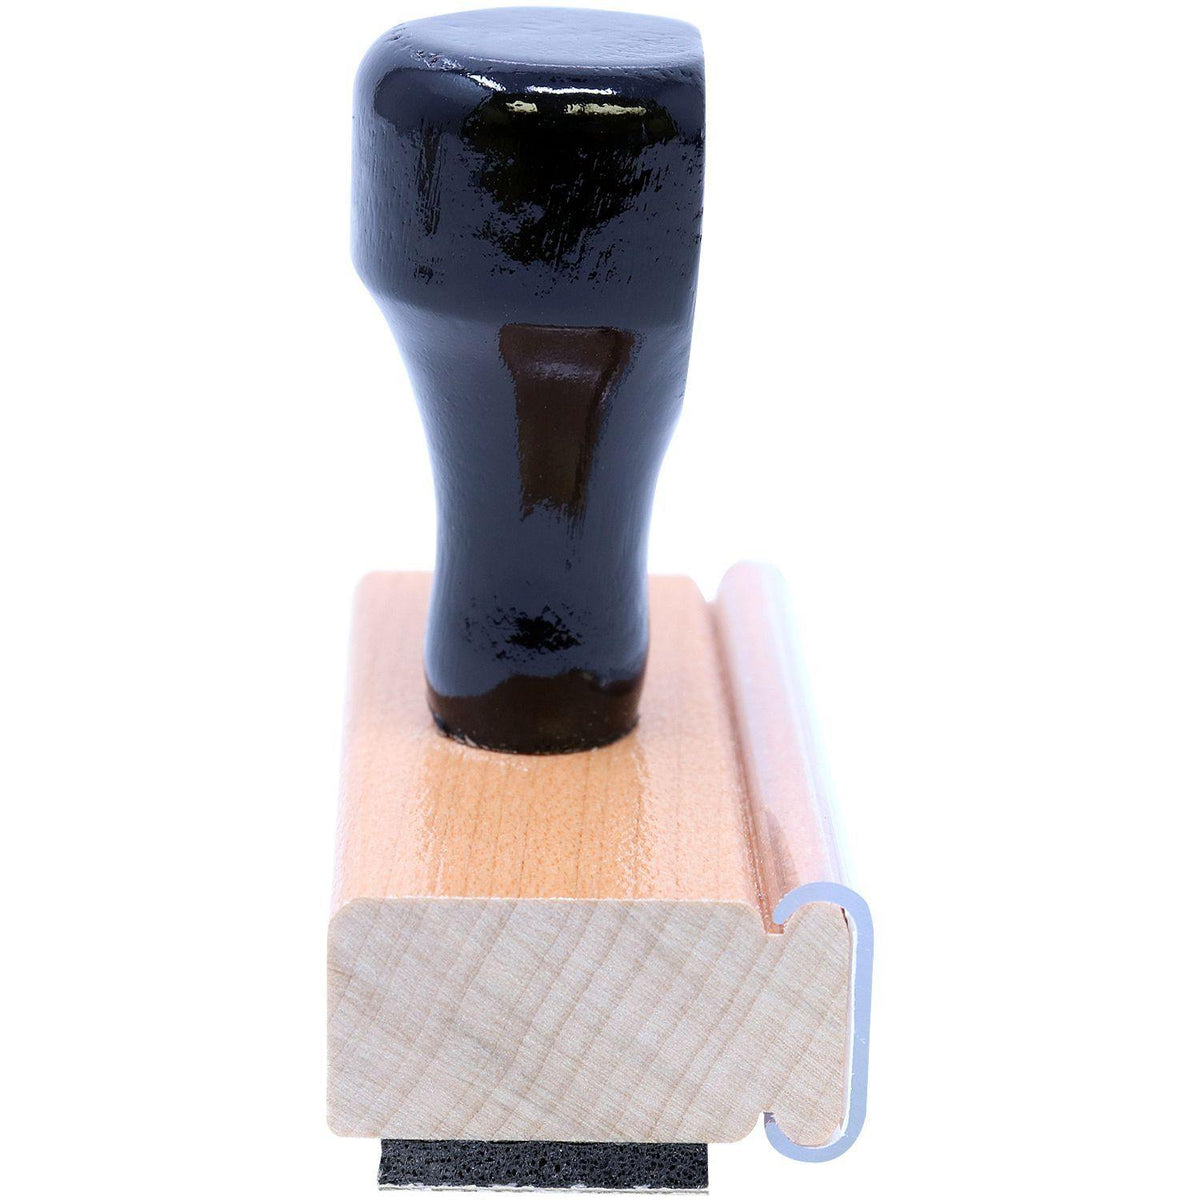 Media Center Rubber Stamp - Engineer Seal Stamps - Brand_Acorn, Impression Size_Small, Stamp Type_Regular Stamp, Type of Use_Professional